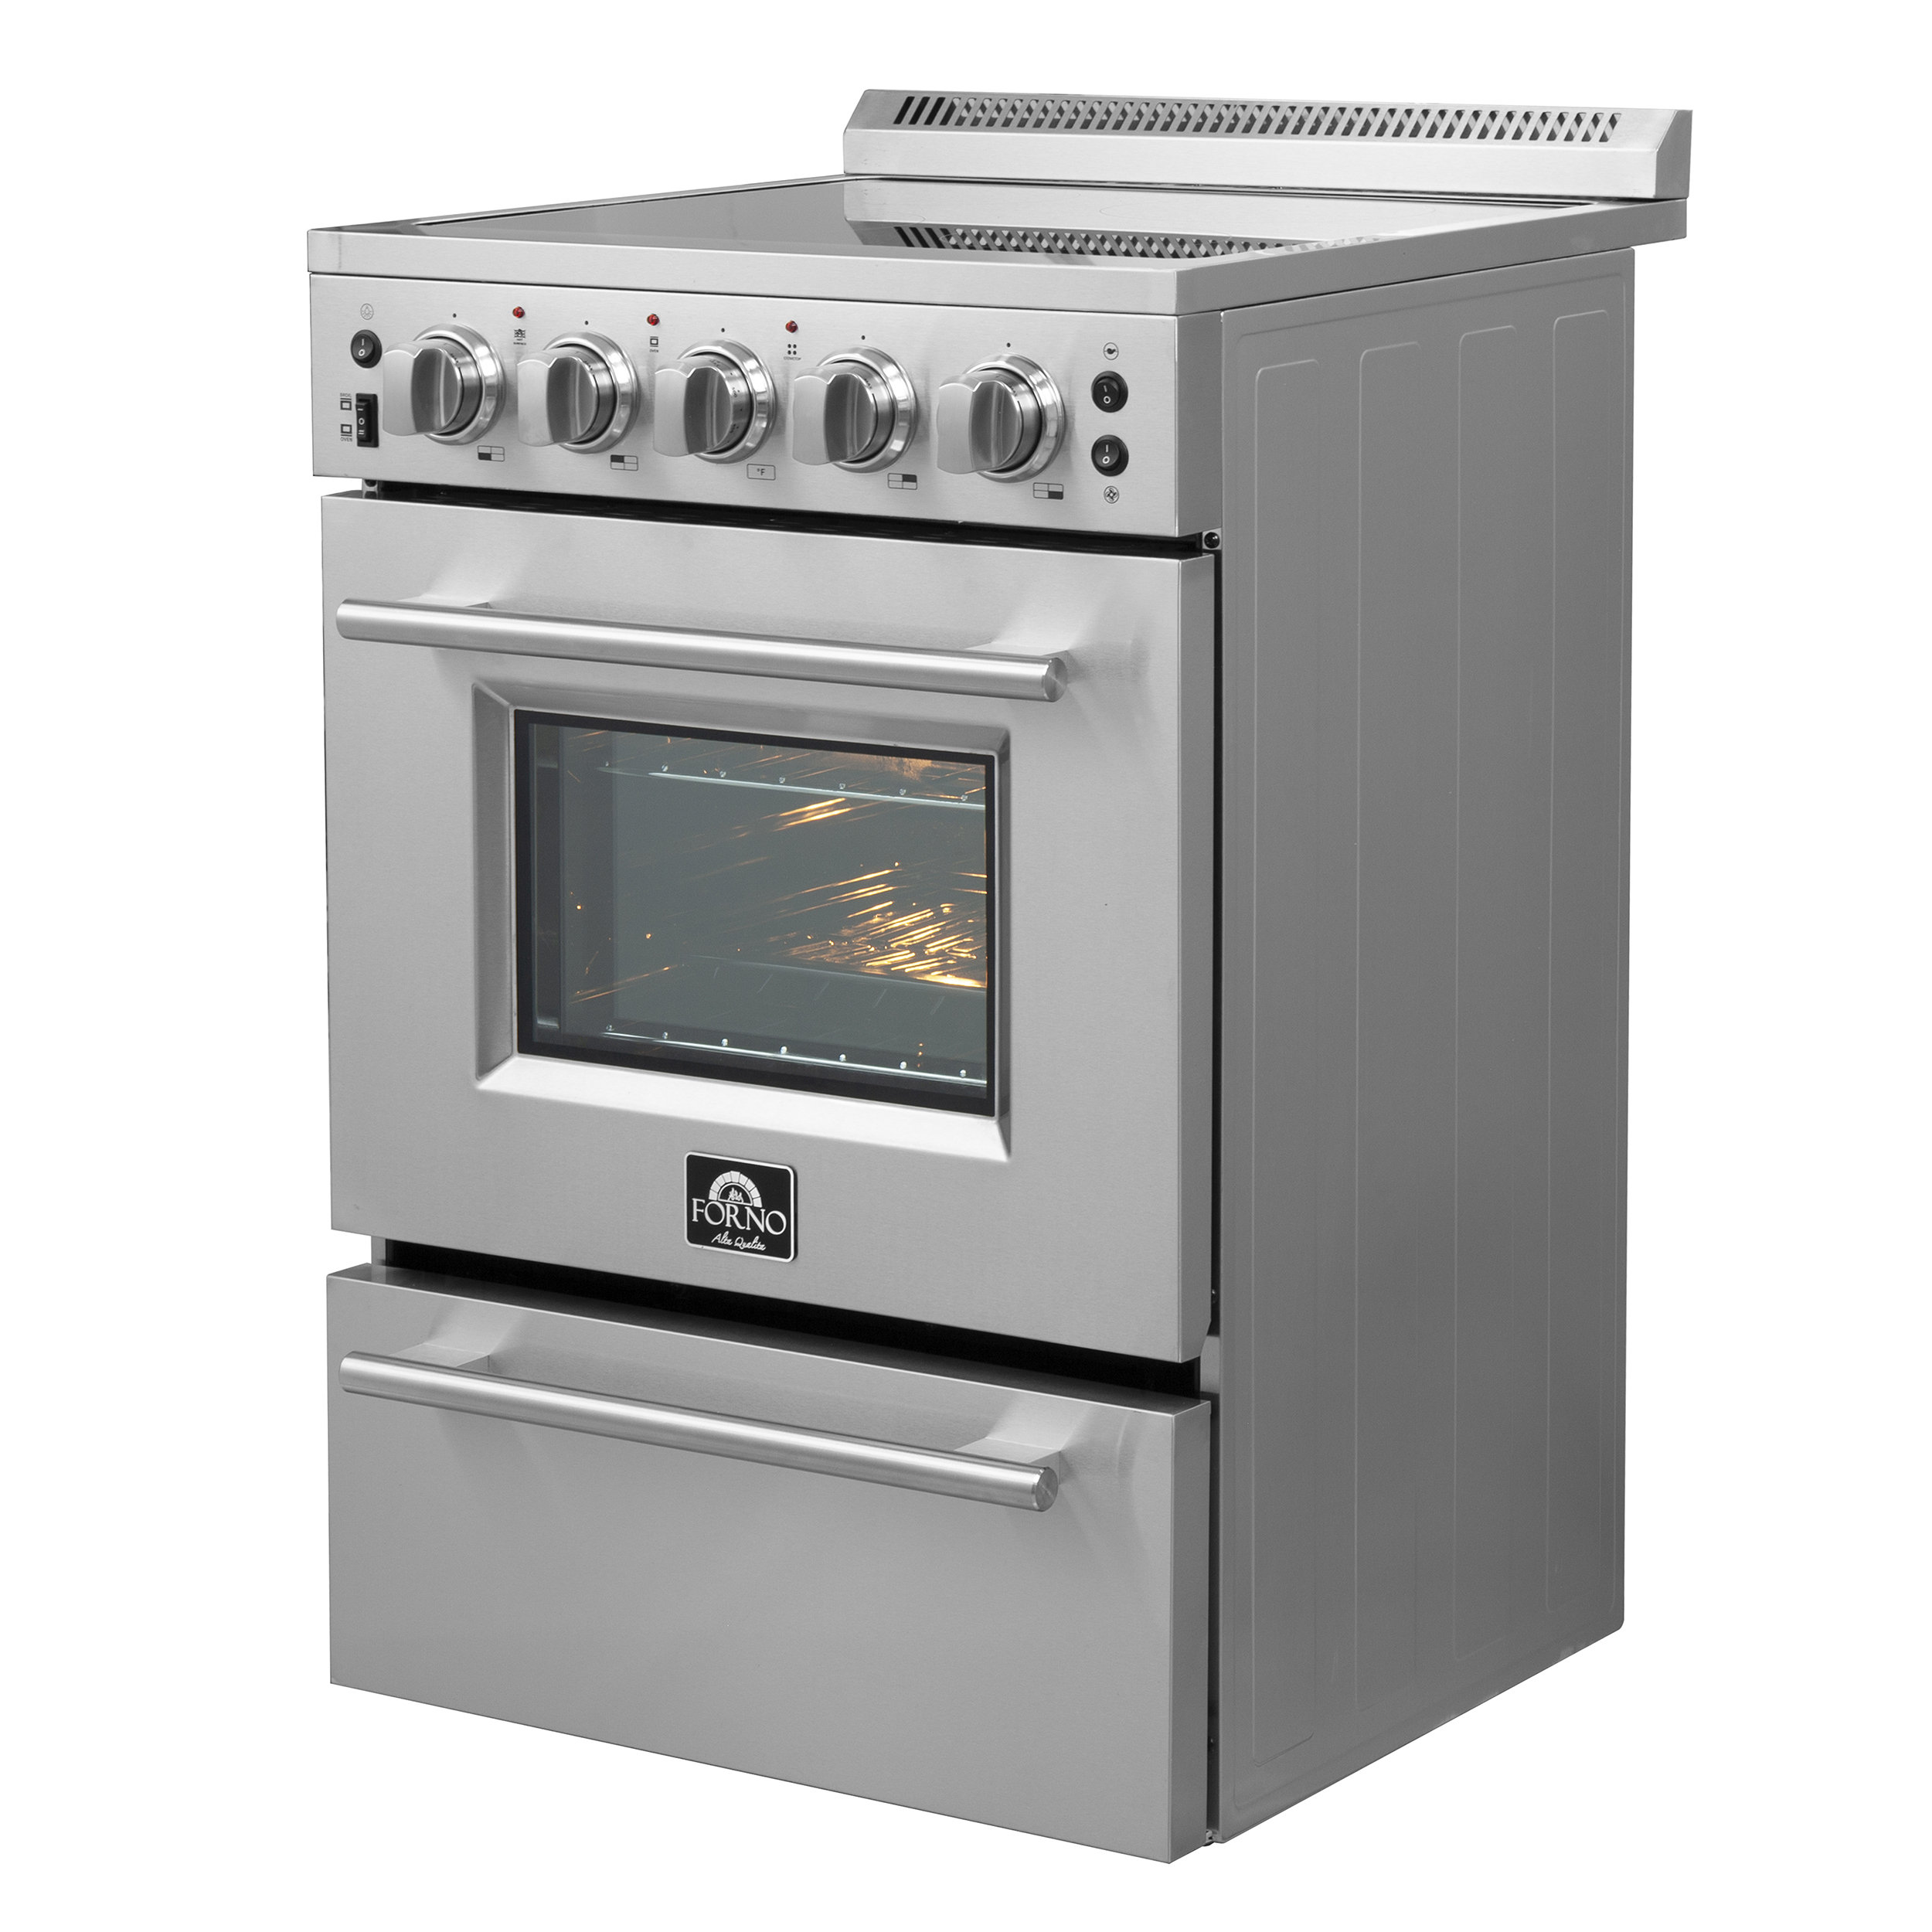 Forno 24 2.3 Cubic Feet Electric Freestanding Range with Radiant Cooktop